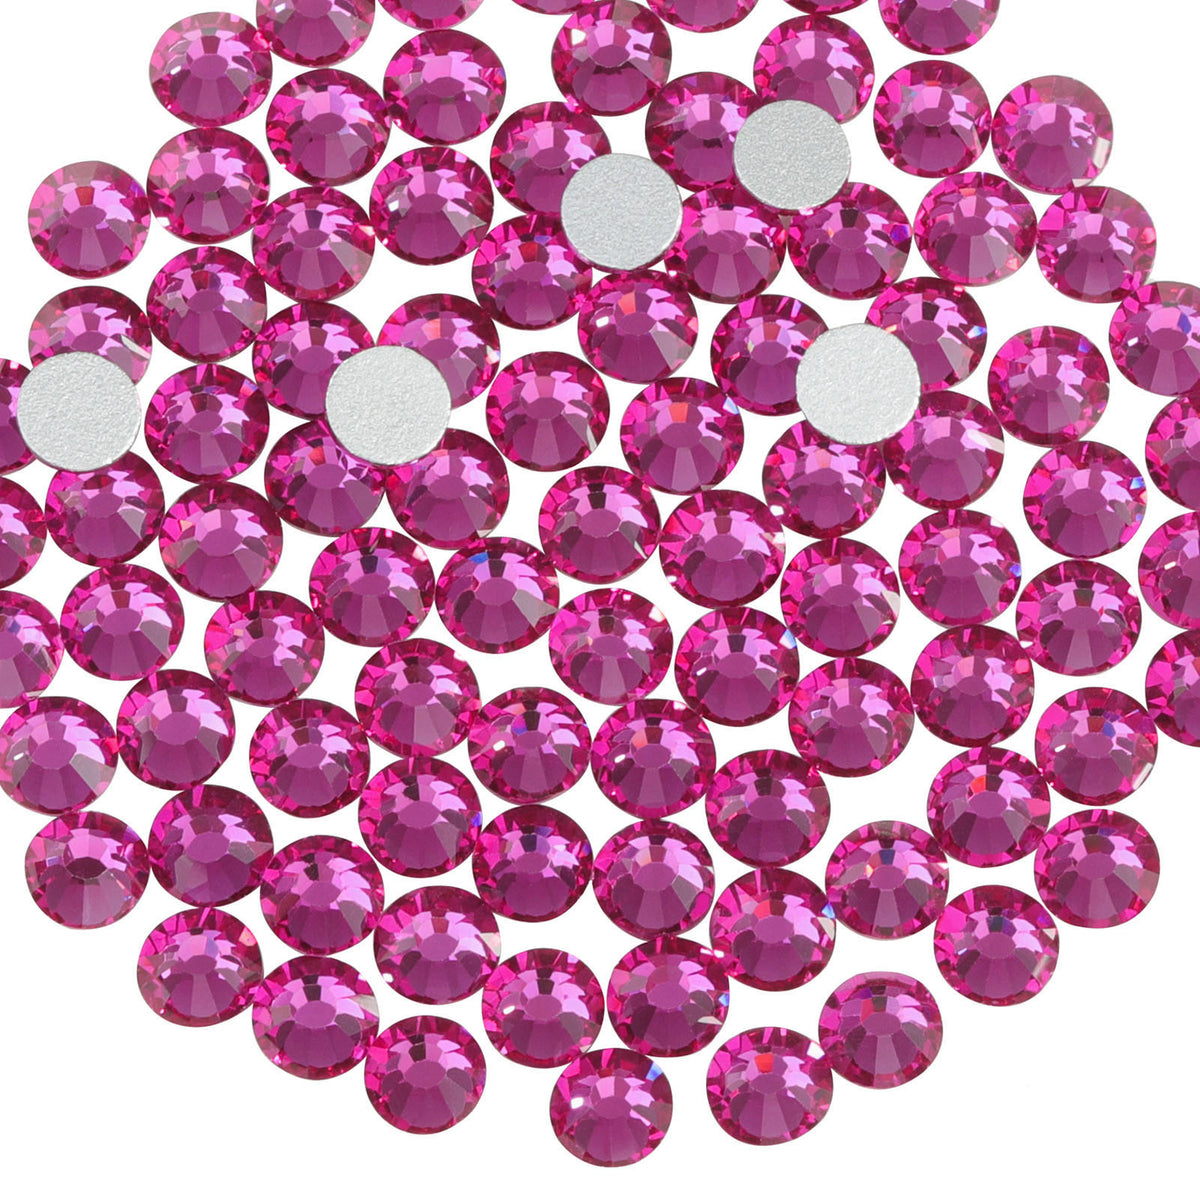 Beadsland Rhinestones for Makeup,8 Sizes 2500pcs Crystal Flatback  Rhinestones Face Gems for Nails Crafts with Tweezers and Wax  Pencil,Transparent